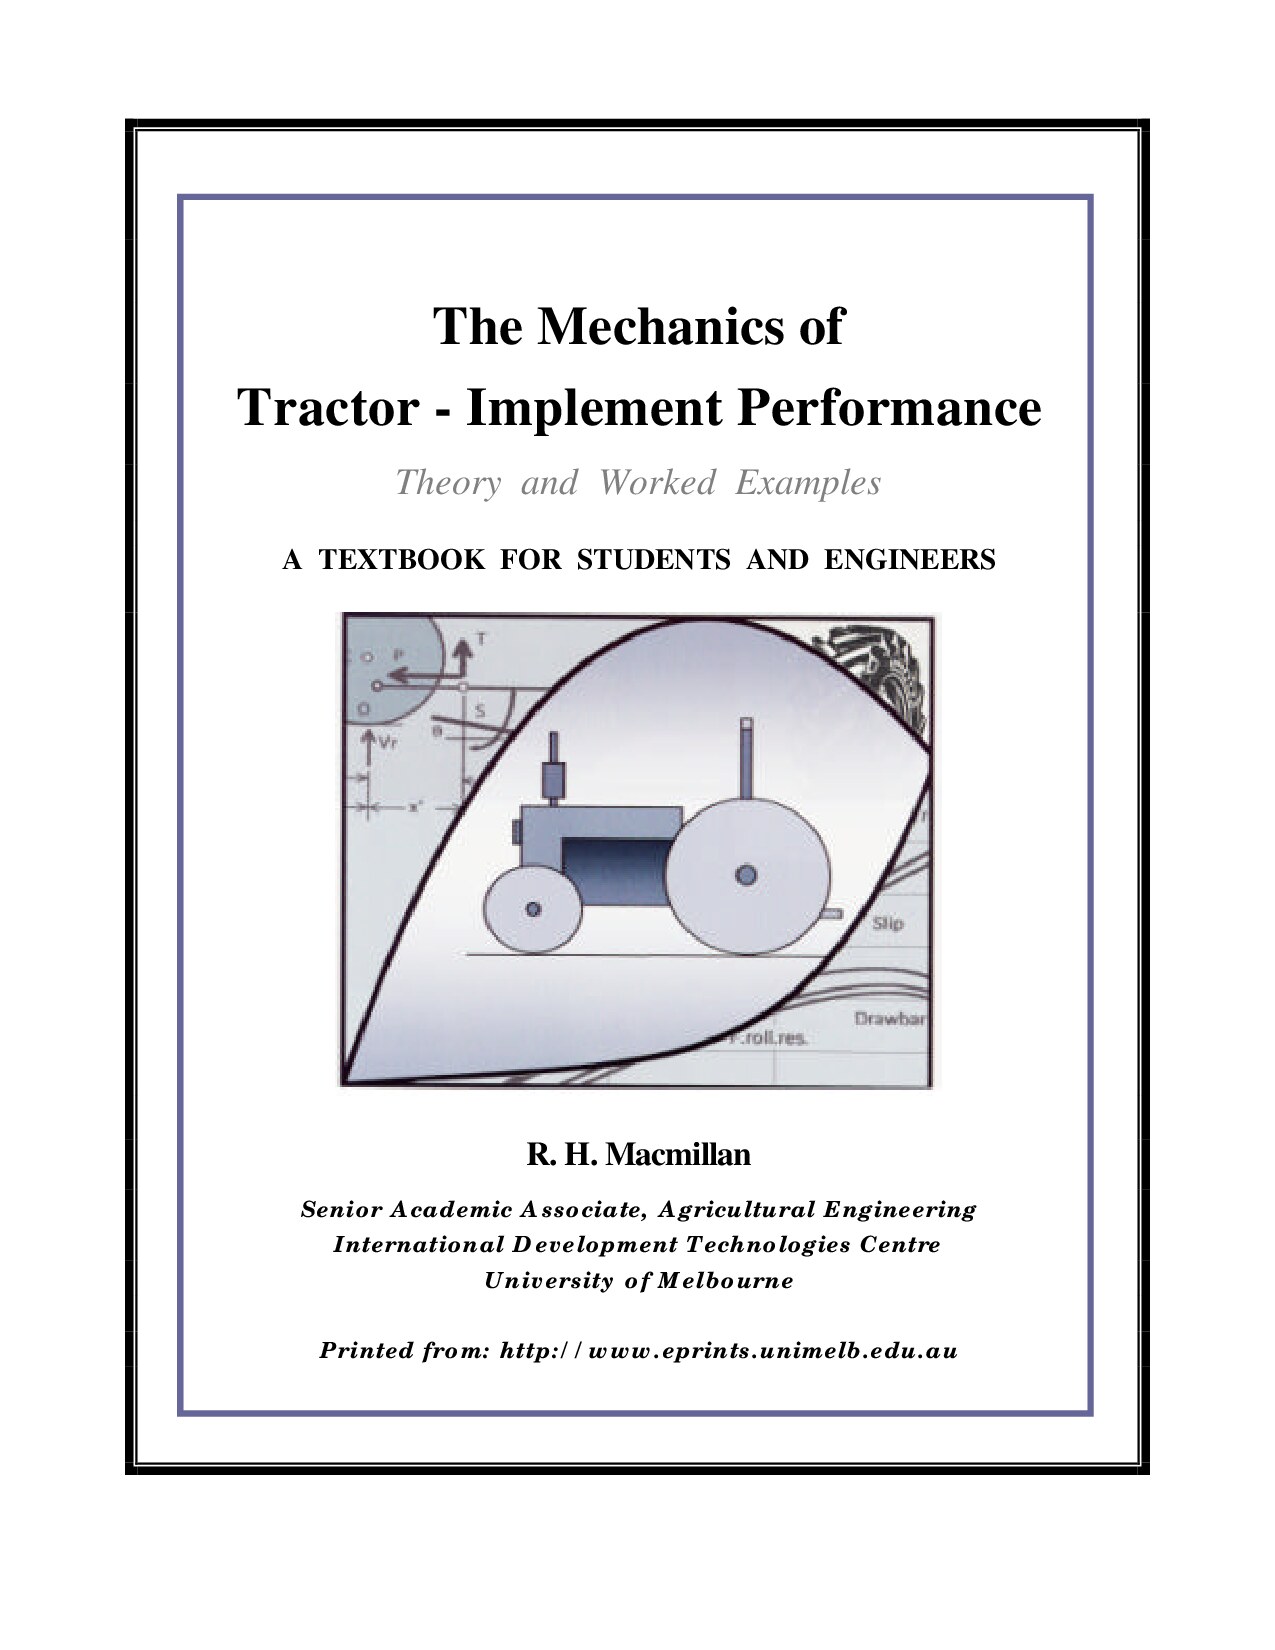 THE MECHANICS OF TRACTOR - IMPLEMENT PERFORMANCE_THEORY AND WORKED EXAMPLES_A TEXTBOOK FOR STUDENTS AND ENGINEERS BY R. H. MACMILLAN